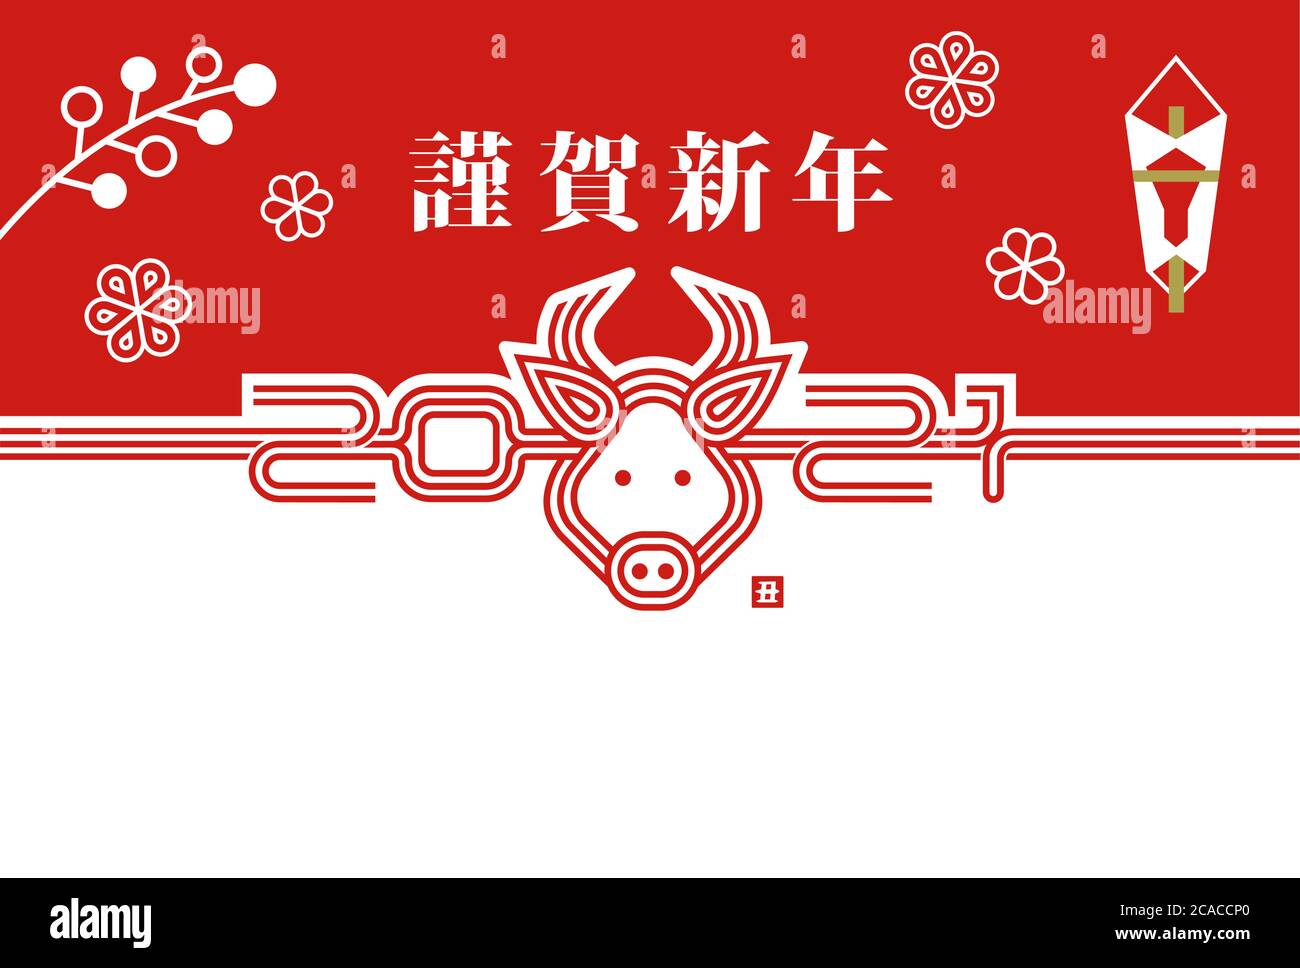 2021 New year greeting card template illustration /  Ox's face made by Japanese mizuhiki (traditional  decorative cord made from twisted paper) / no g Stock Vector